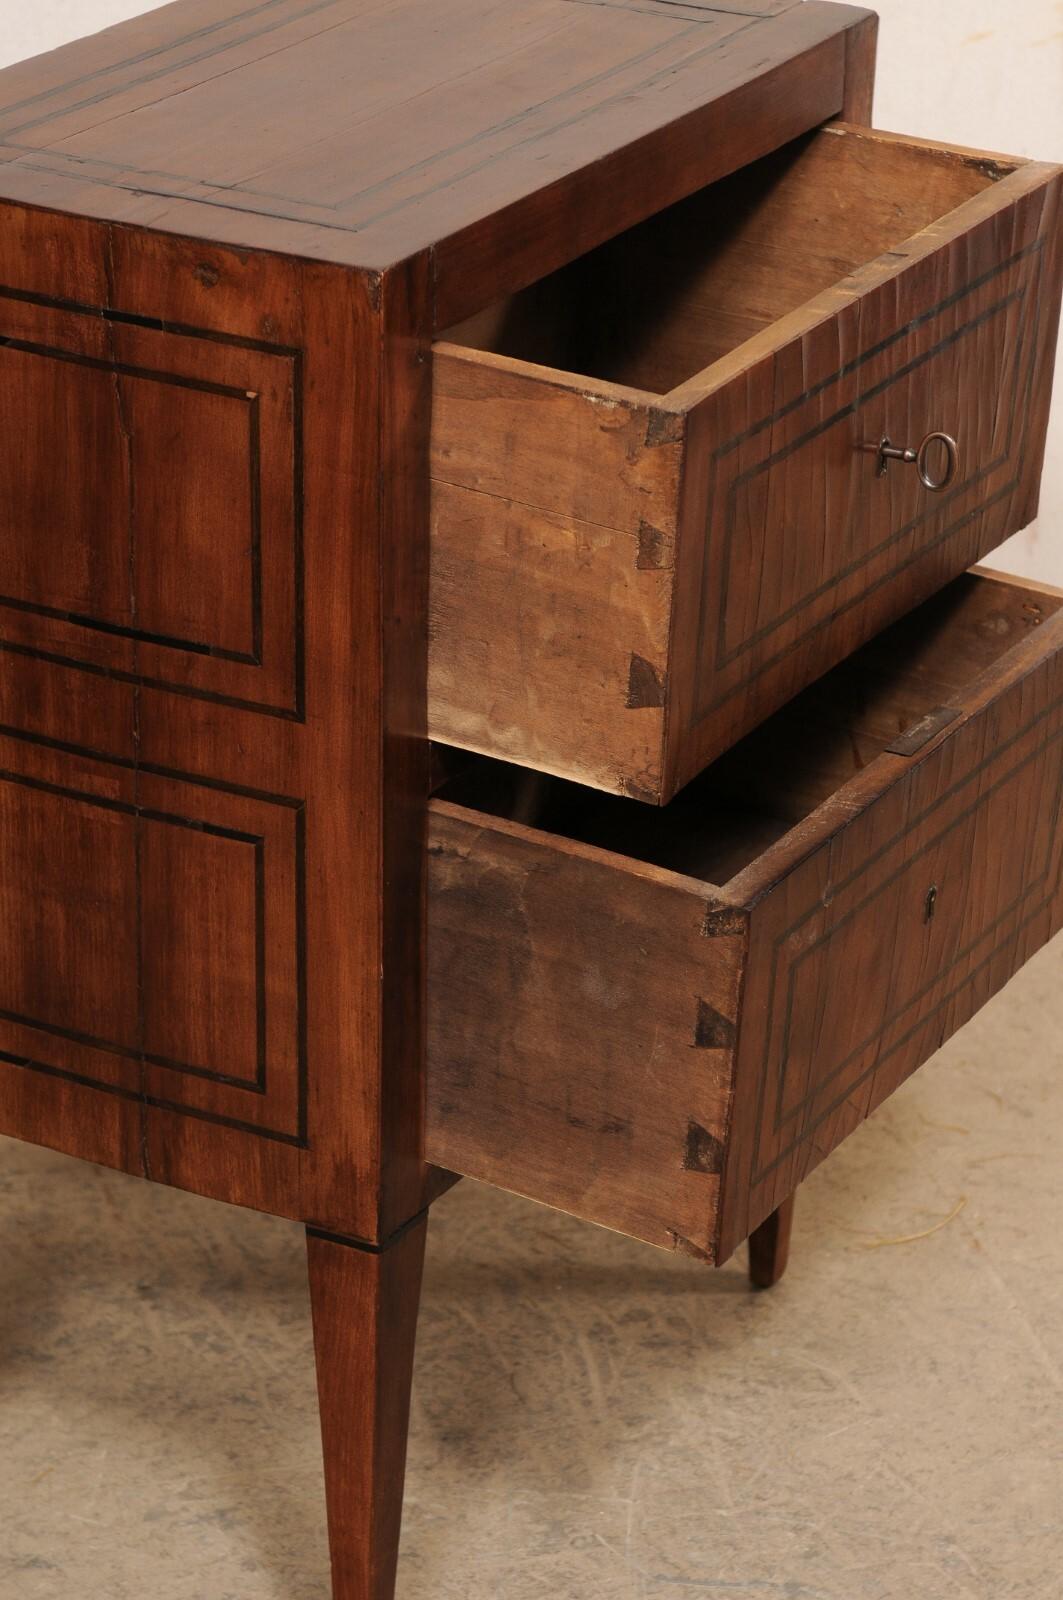 Wood Italian Pair of Two-Drawer Side Chests w/Nice Inlay Banding, Early 19th C. For Sale